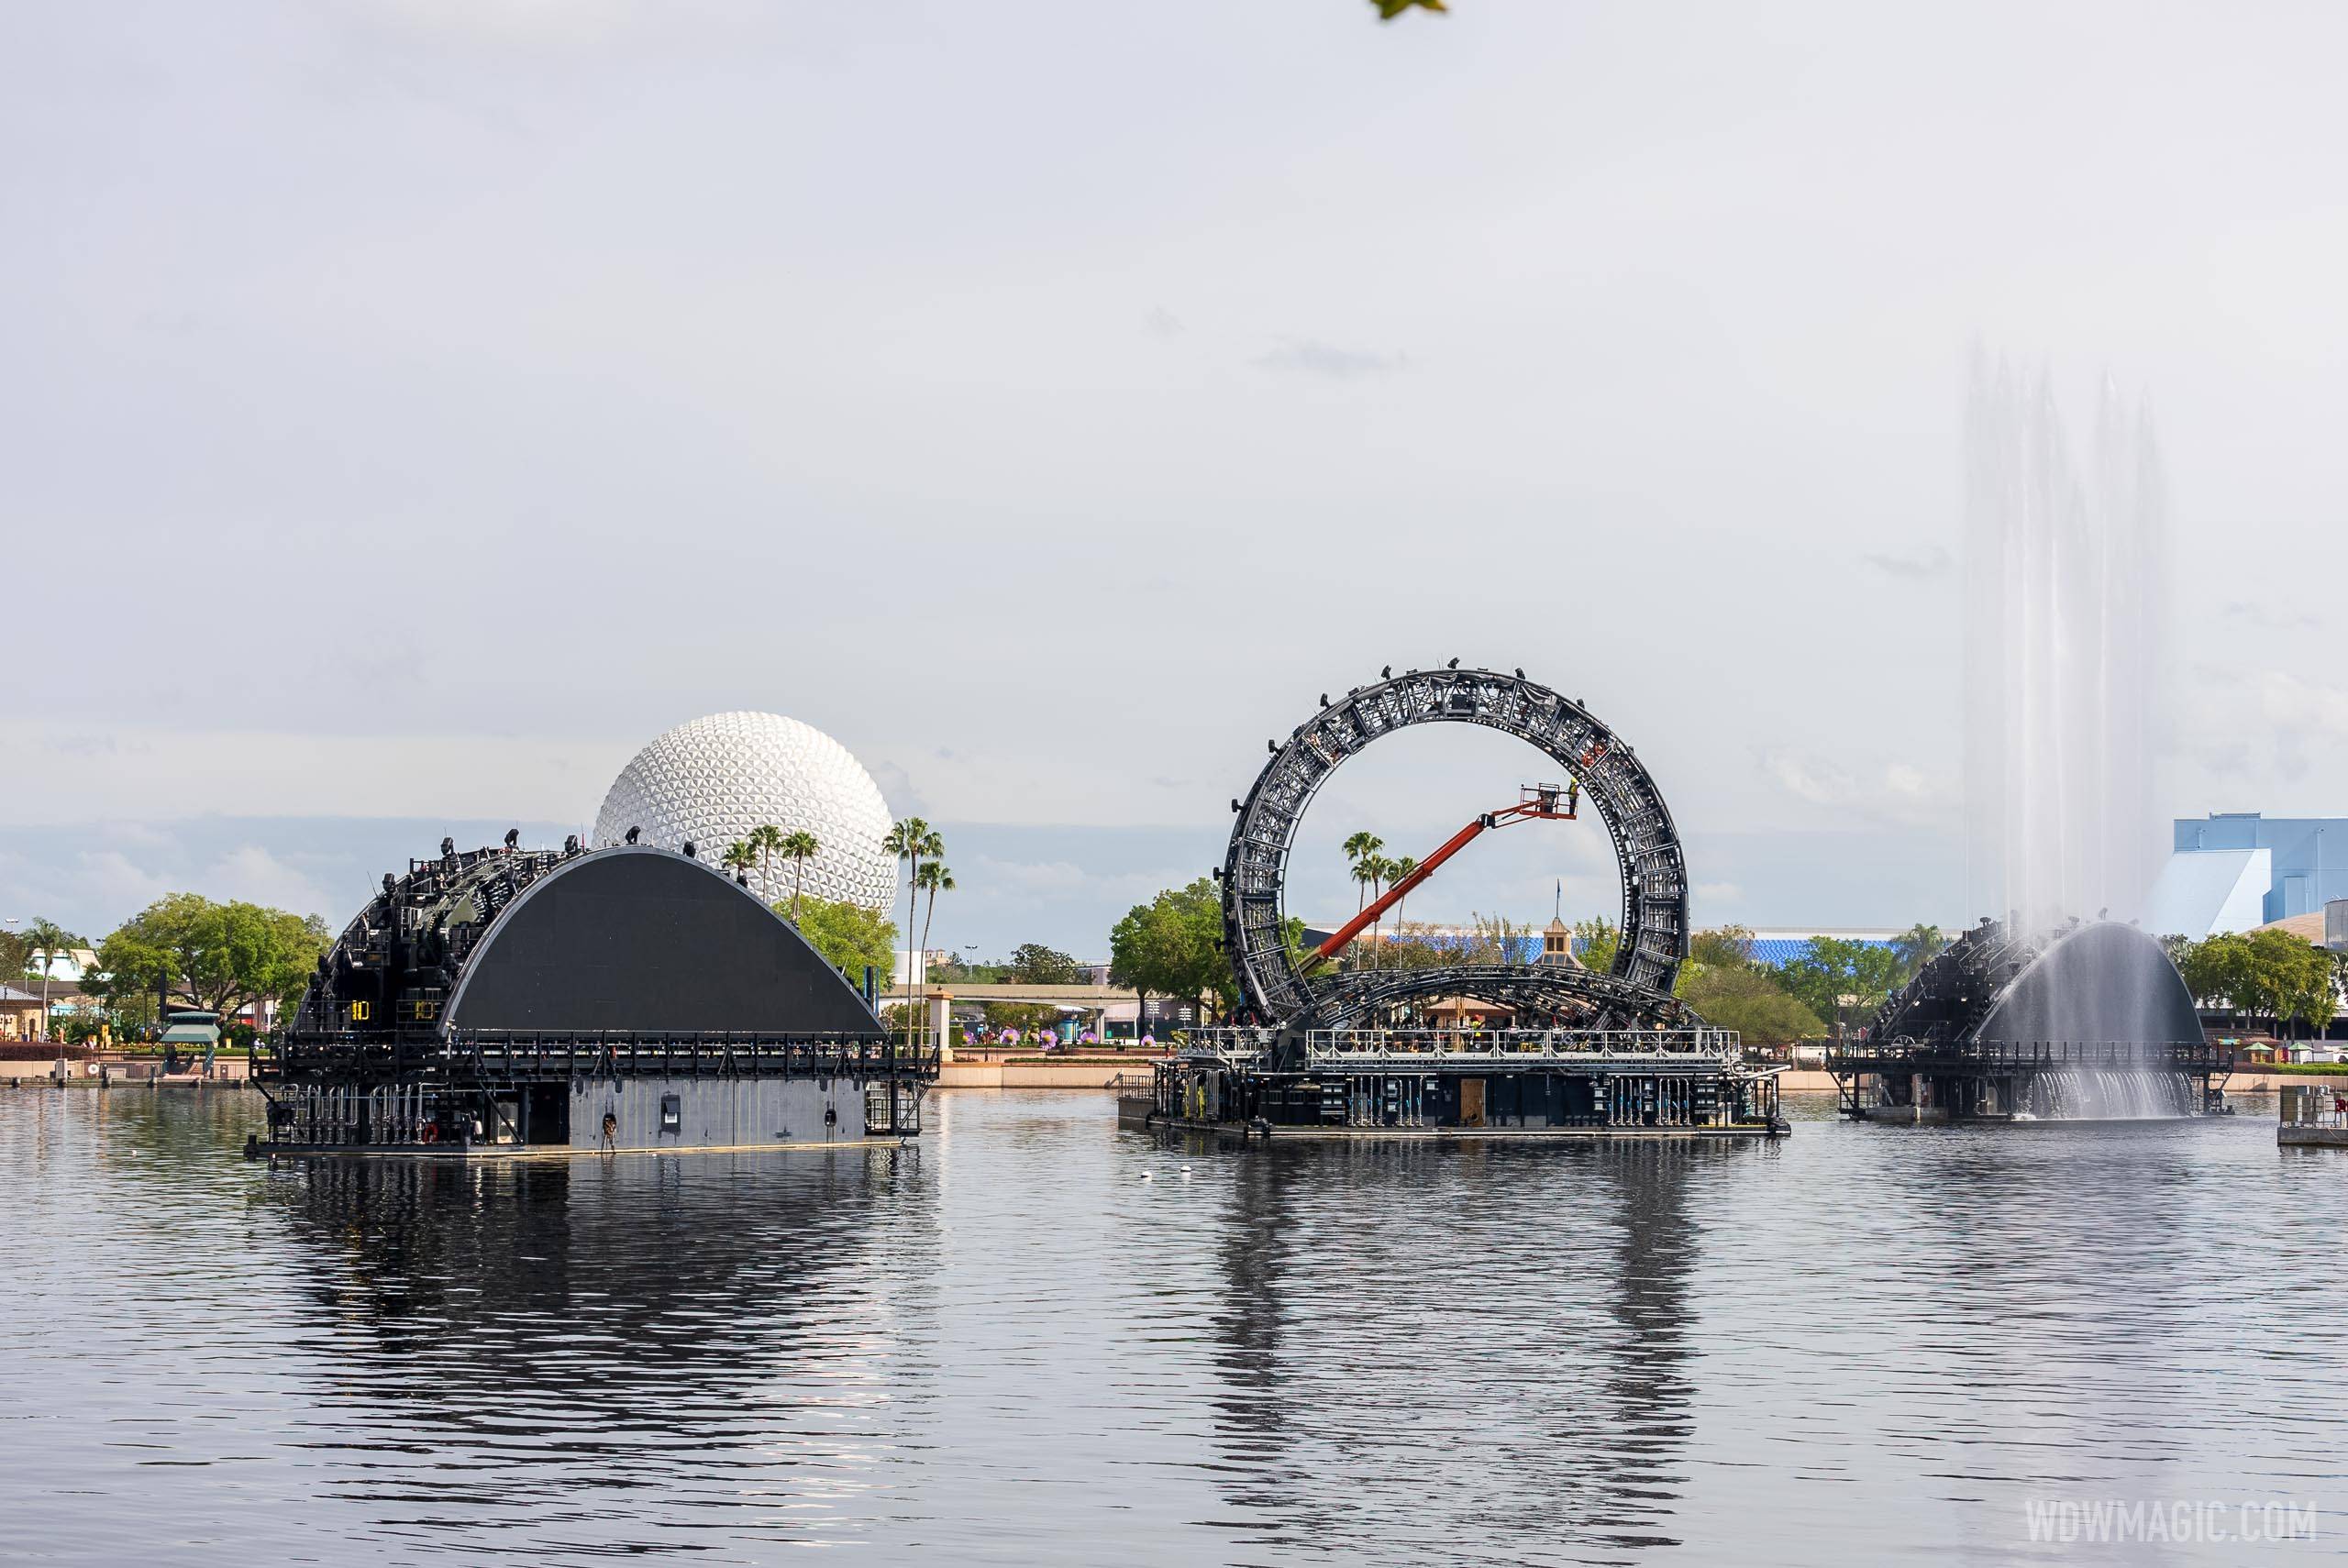 Third Harmonious fin shaped barge now in position on World Showcase Lagoon